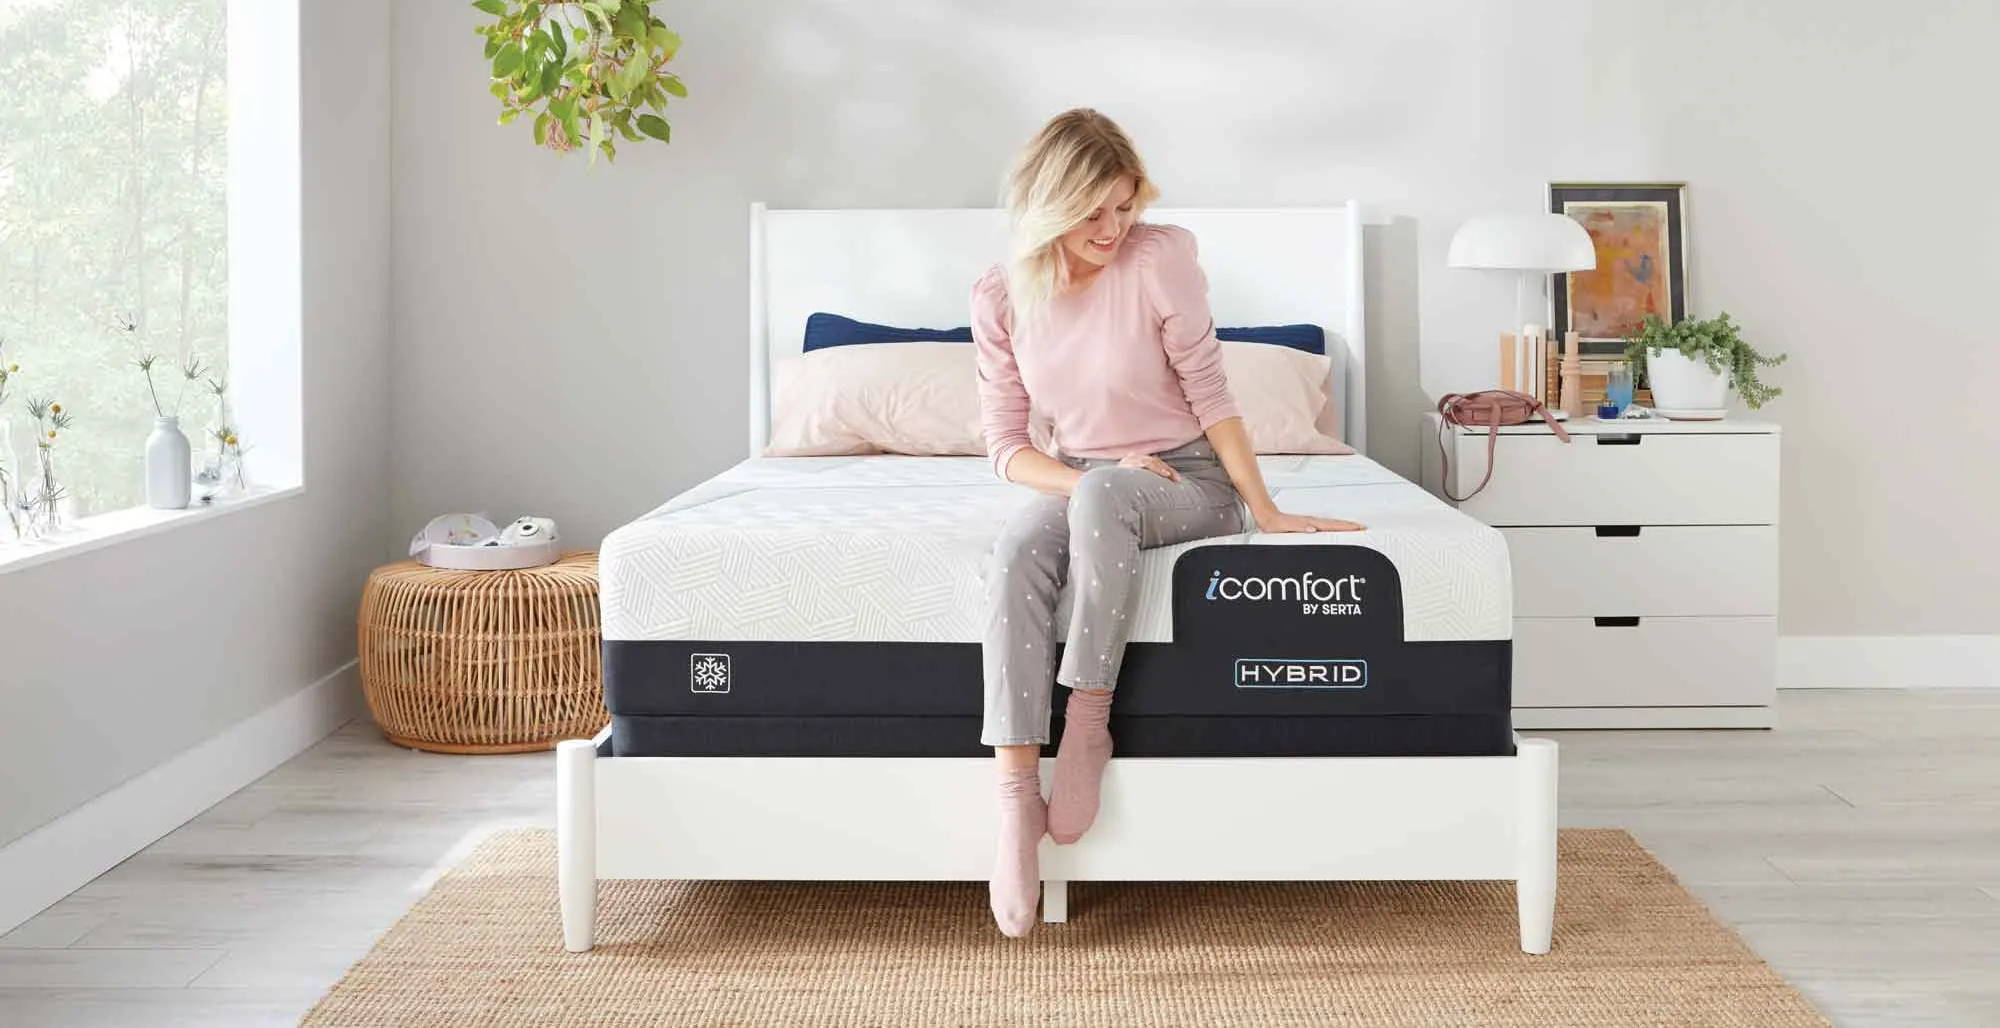 The 3 Most Common Mattress Types (A Guide to Coil Spring, Memory Foam, & Hybrid Mattresses)